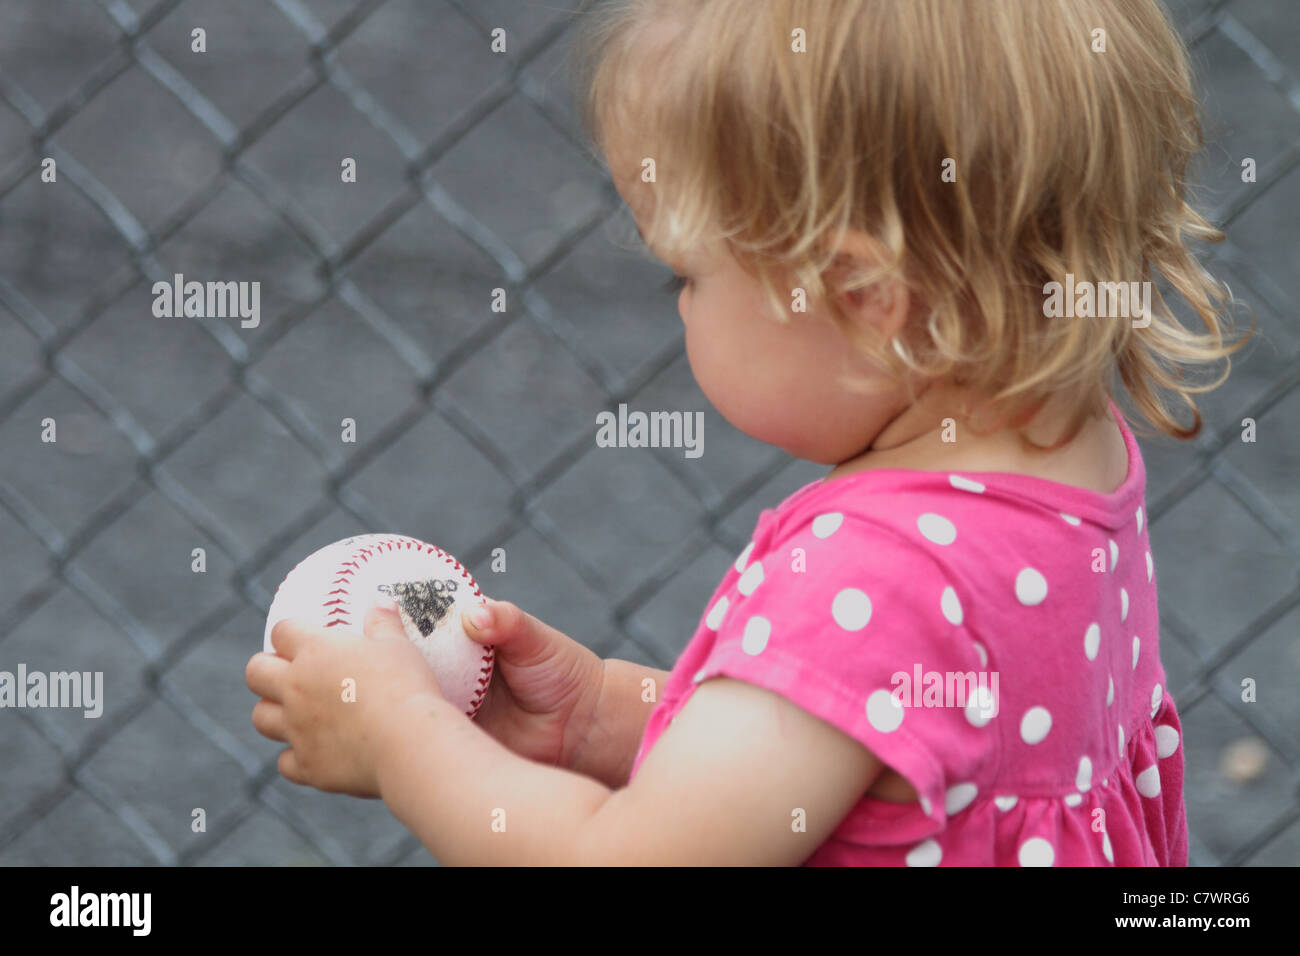 toddler girl with baseball looking and wondering what to do with ball Stock Photo